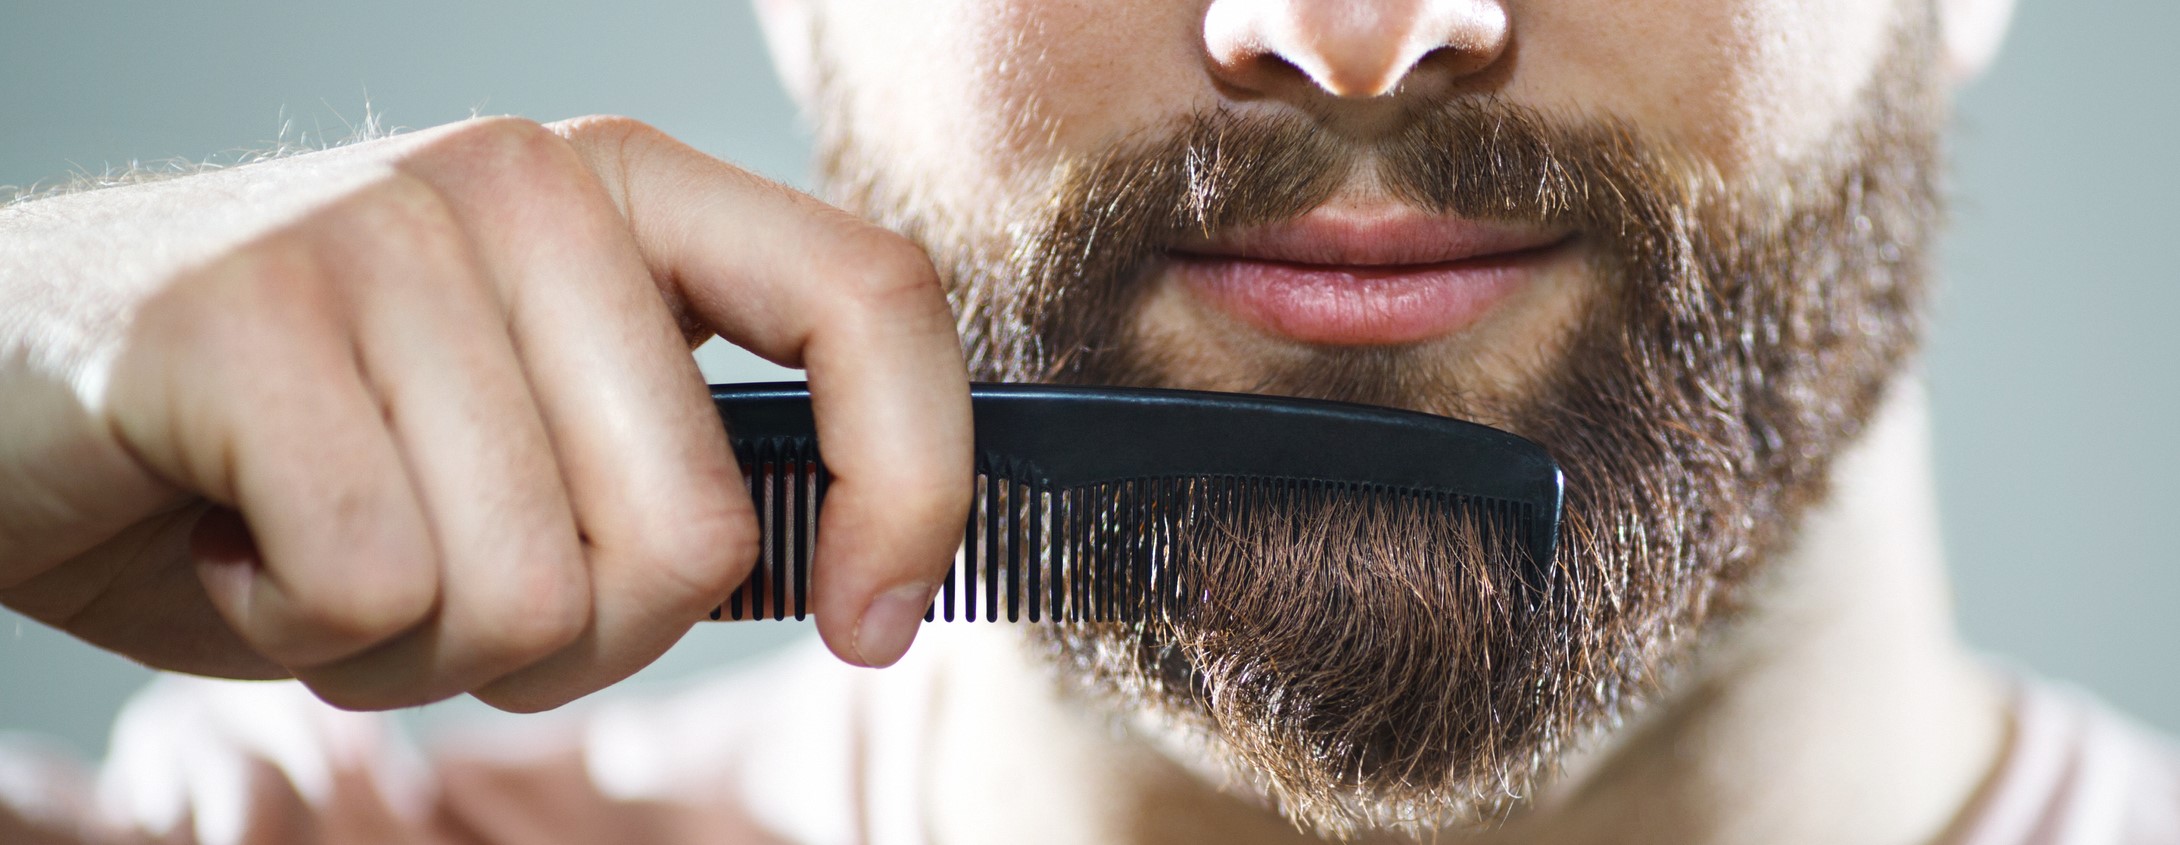 5 Things to Know About Prostate Cancer During No-Shave November